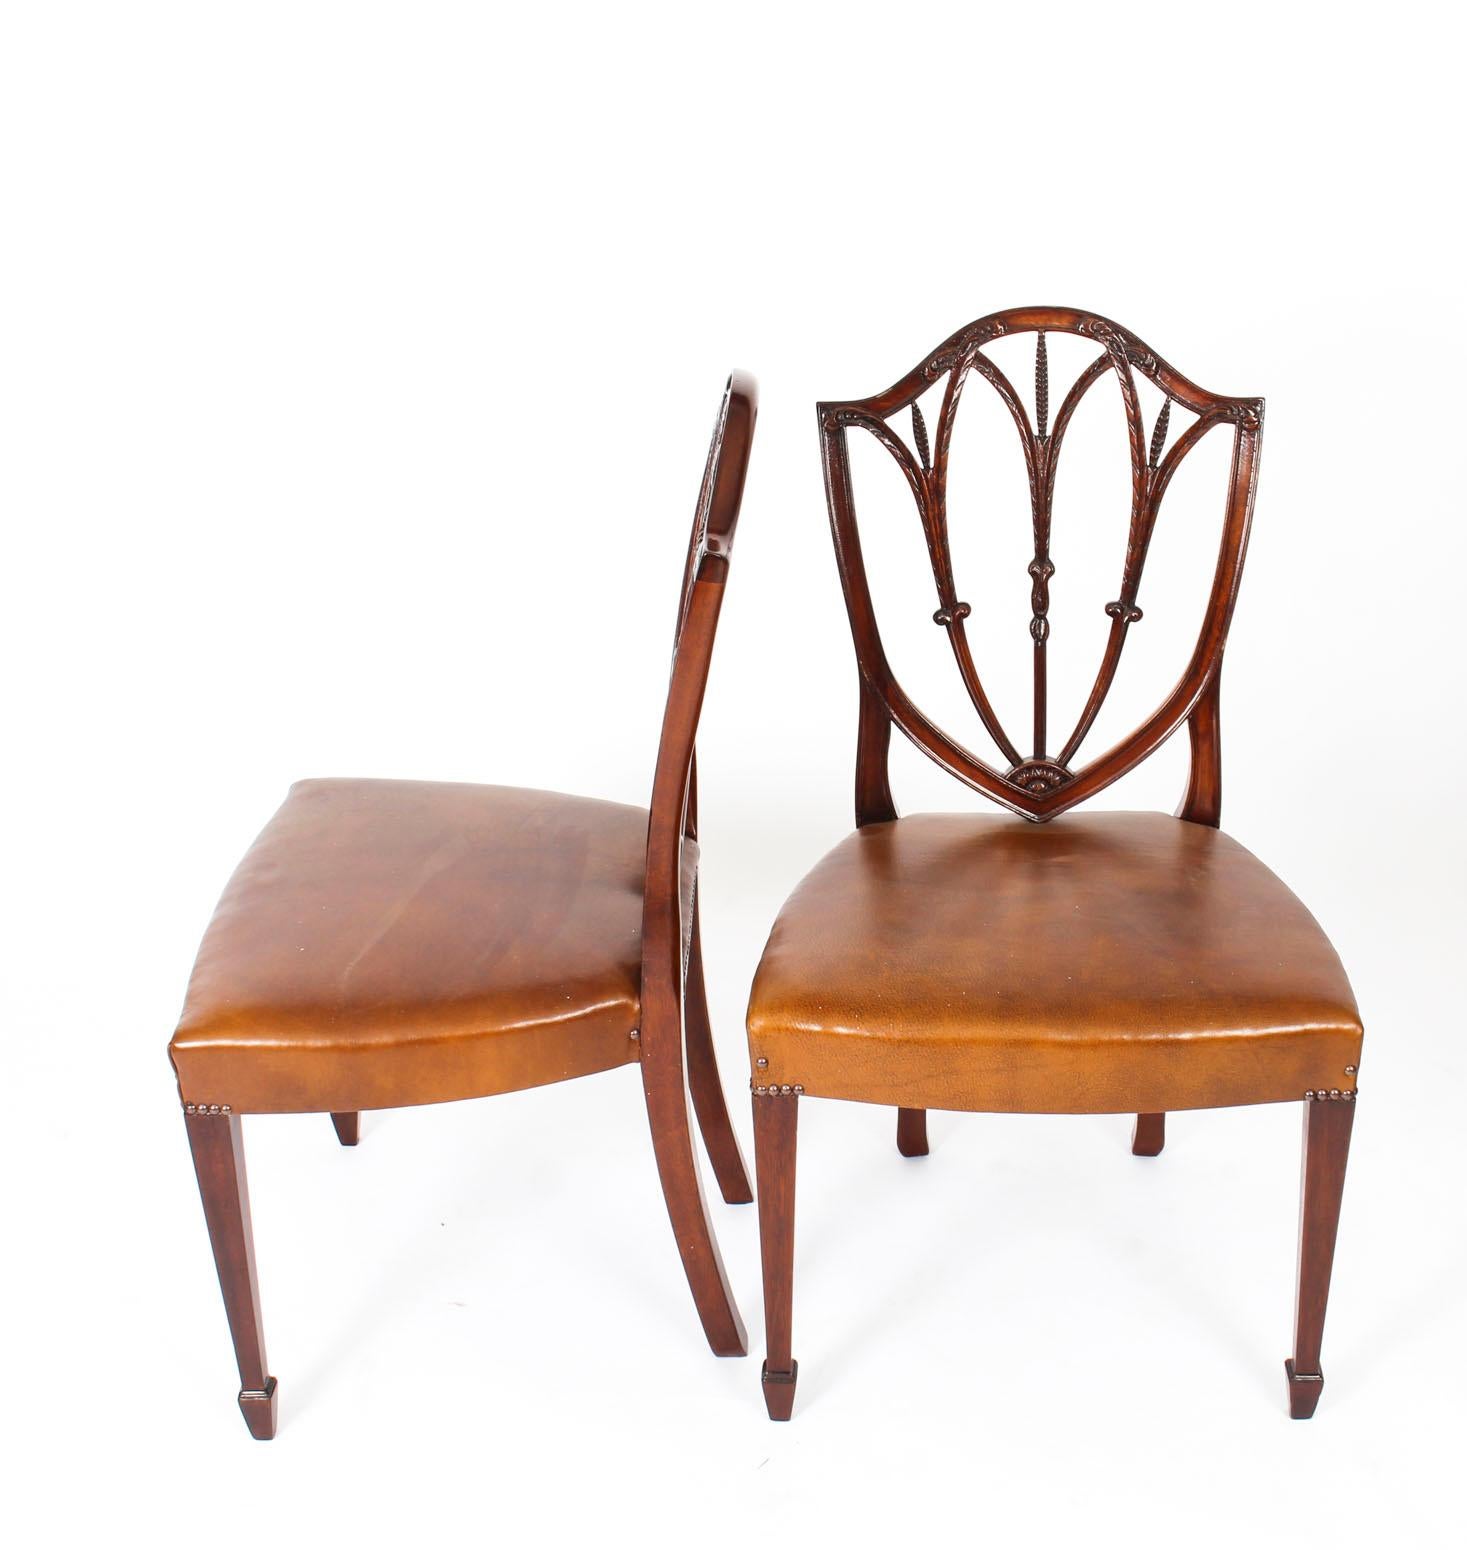 This is a fantastic antique English set of twelve mahogany shield back dining chairs of 